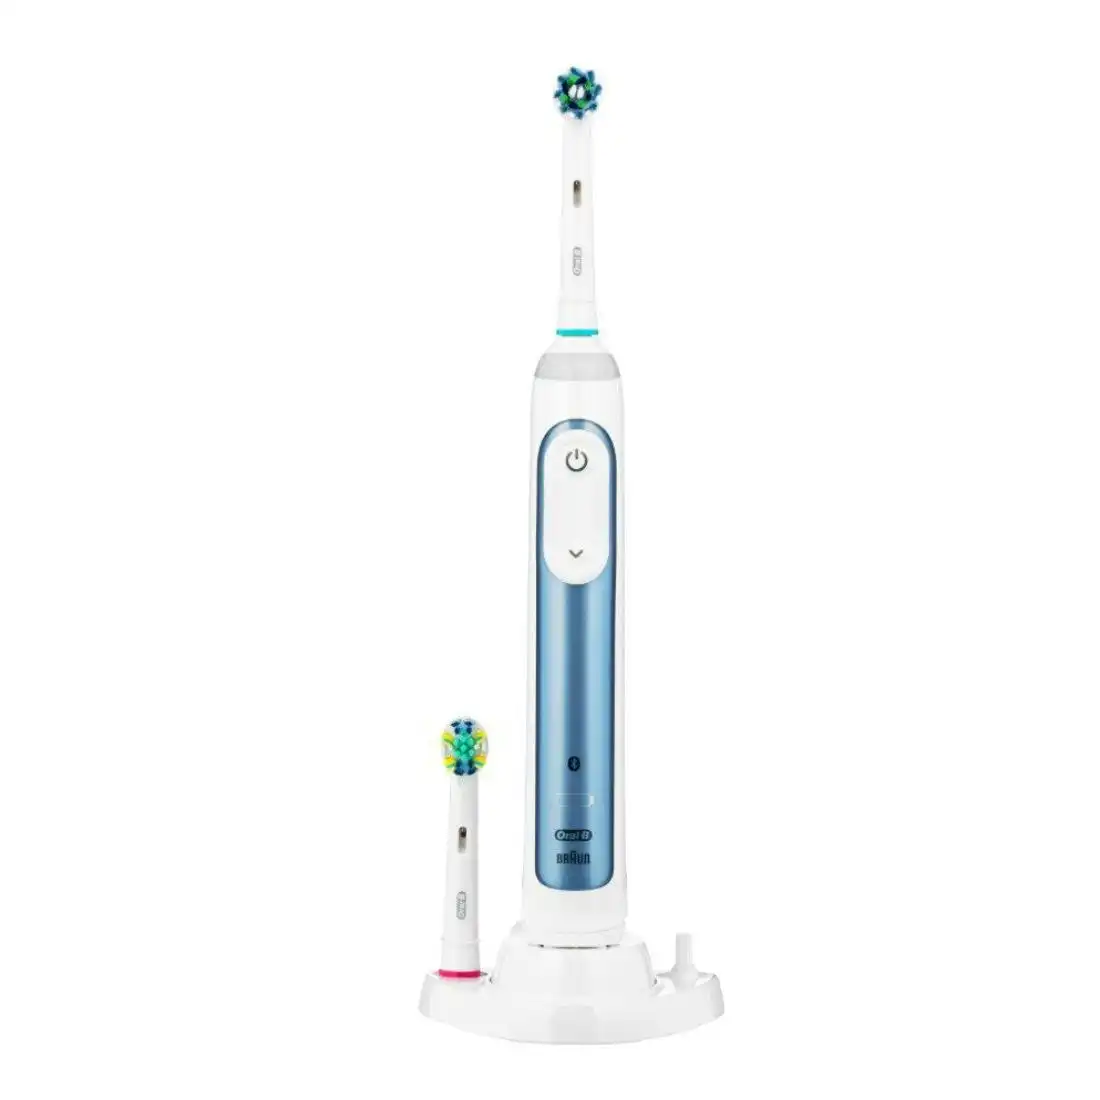 Oral-B Smart 7 7000 Electric Toothbrush with Travel Case - Blue